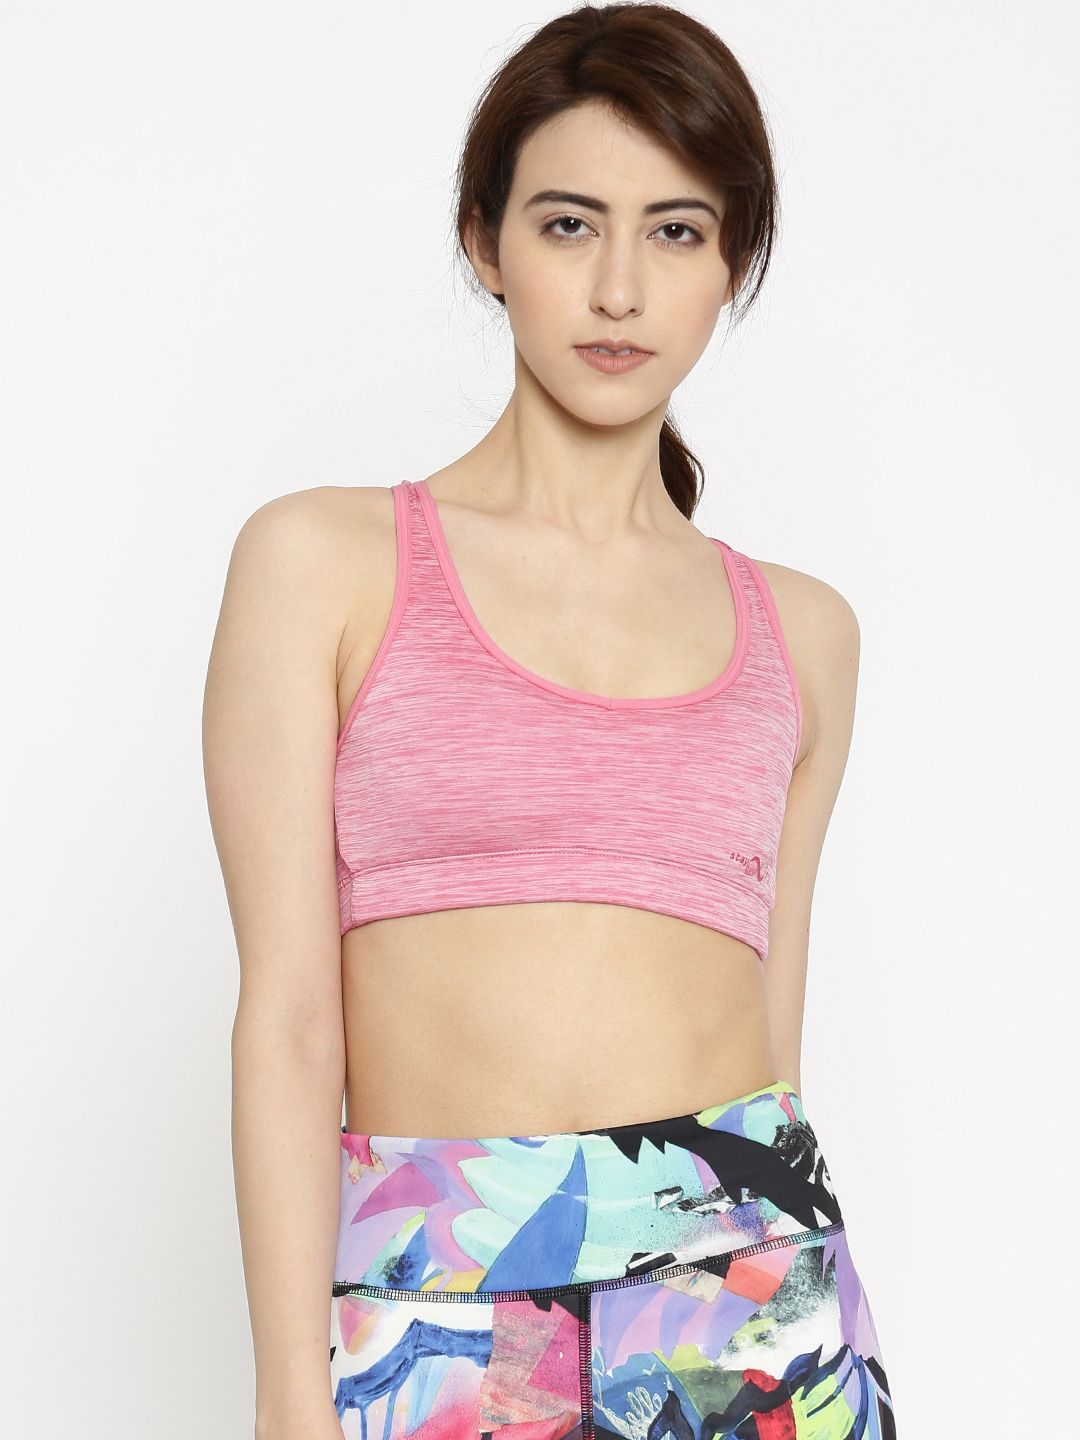 Enamor Pink Non-Wired Lightly Padded Medium Coverage Low Impact Sports Bra SB10 Price in India